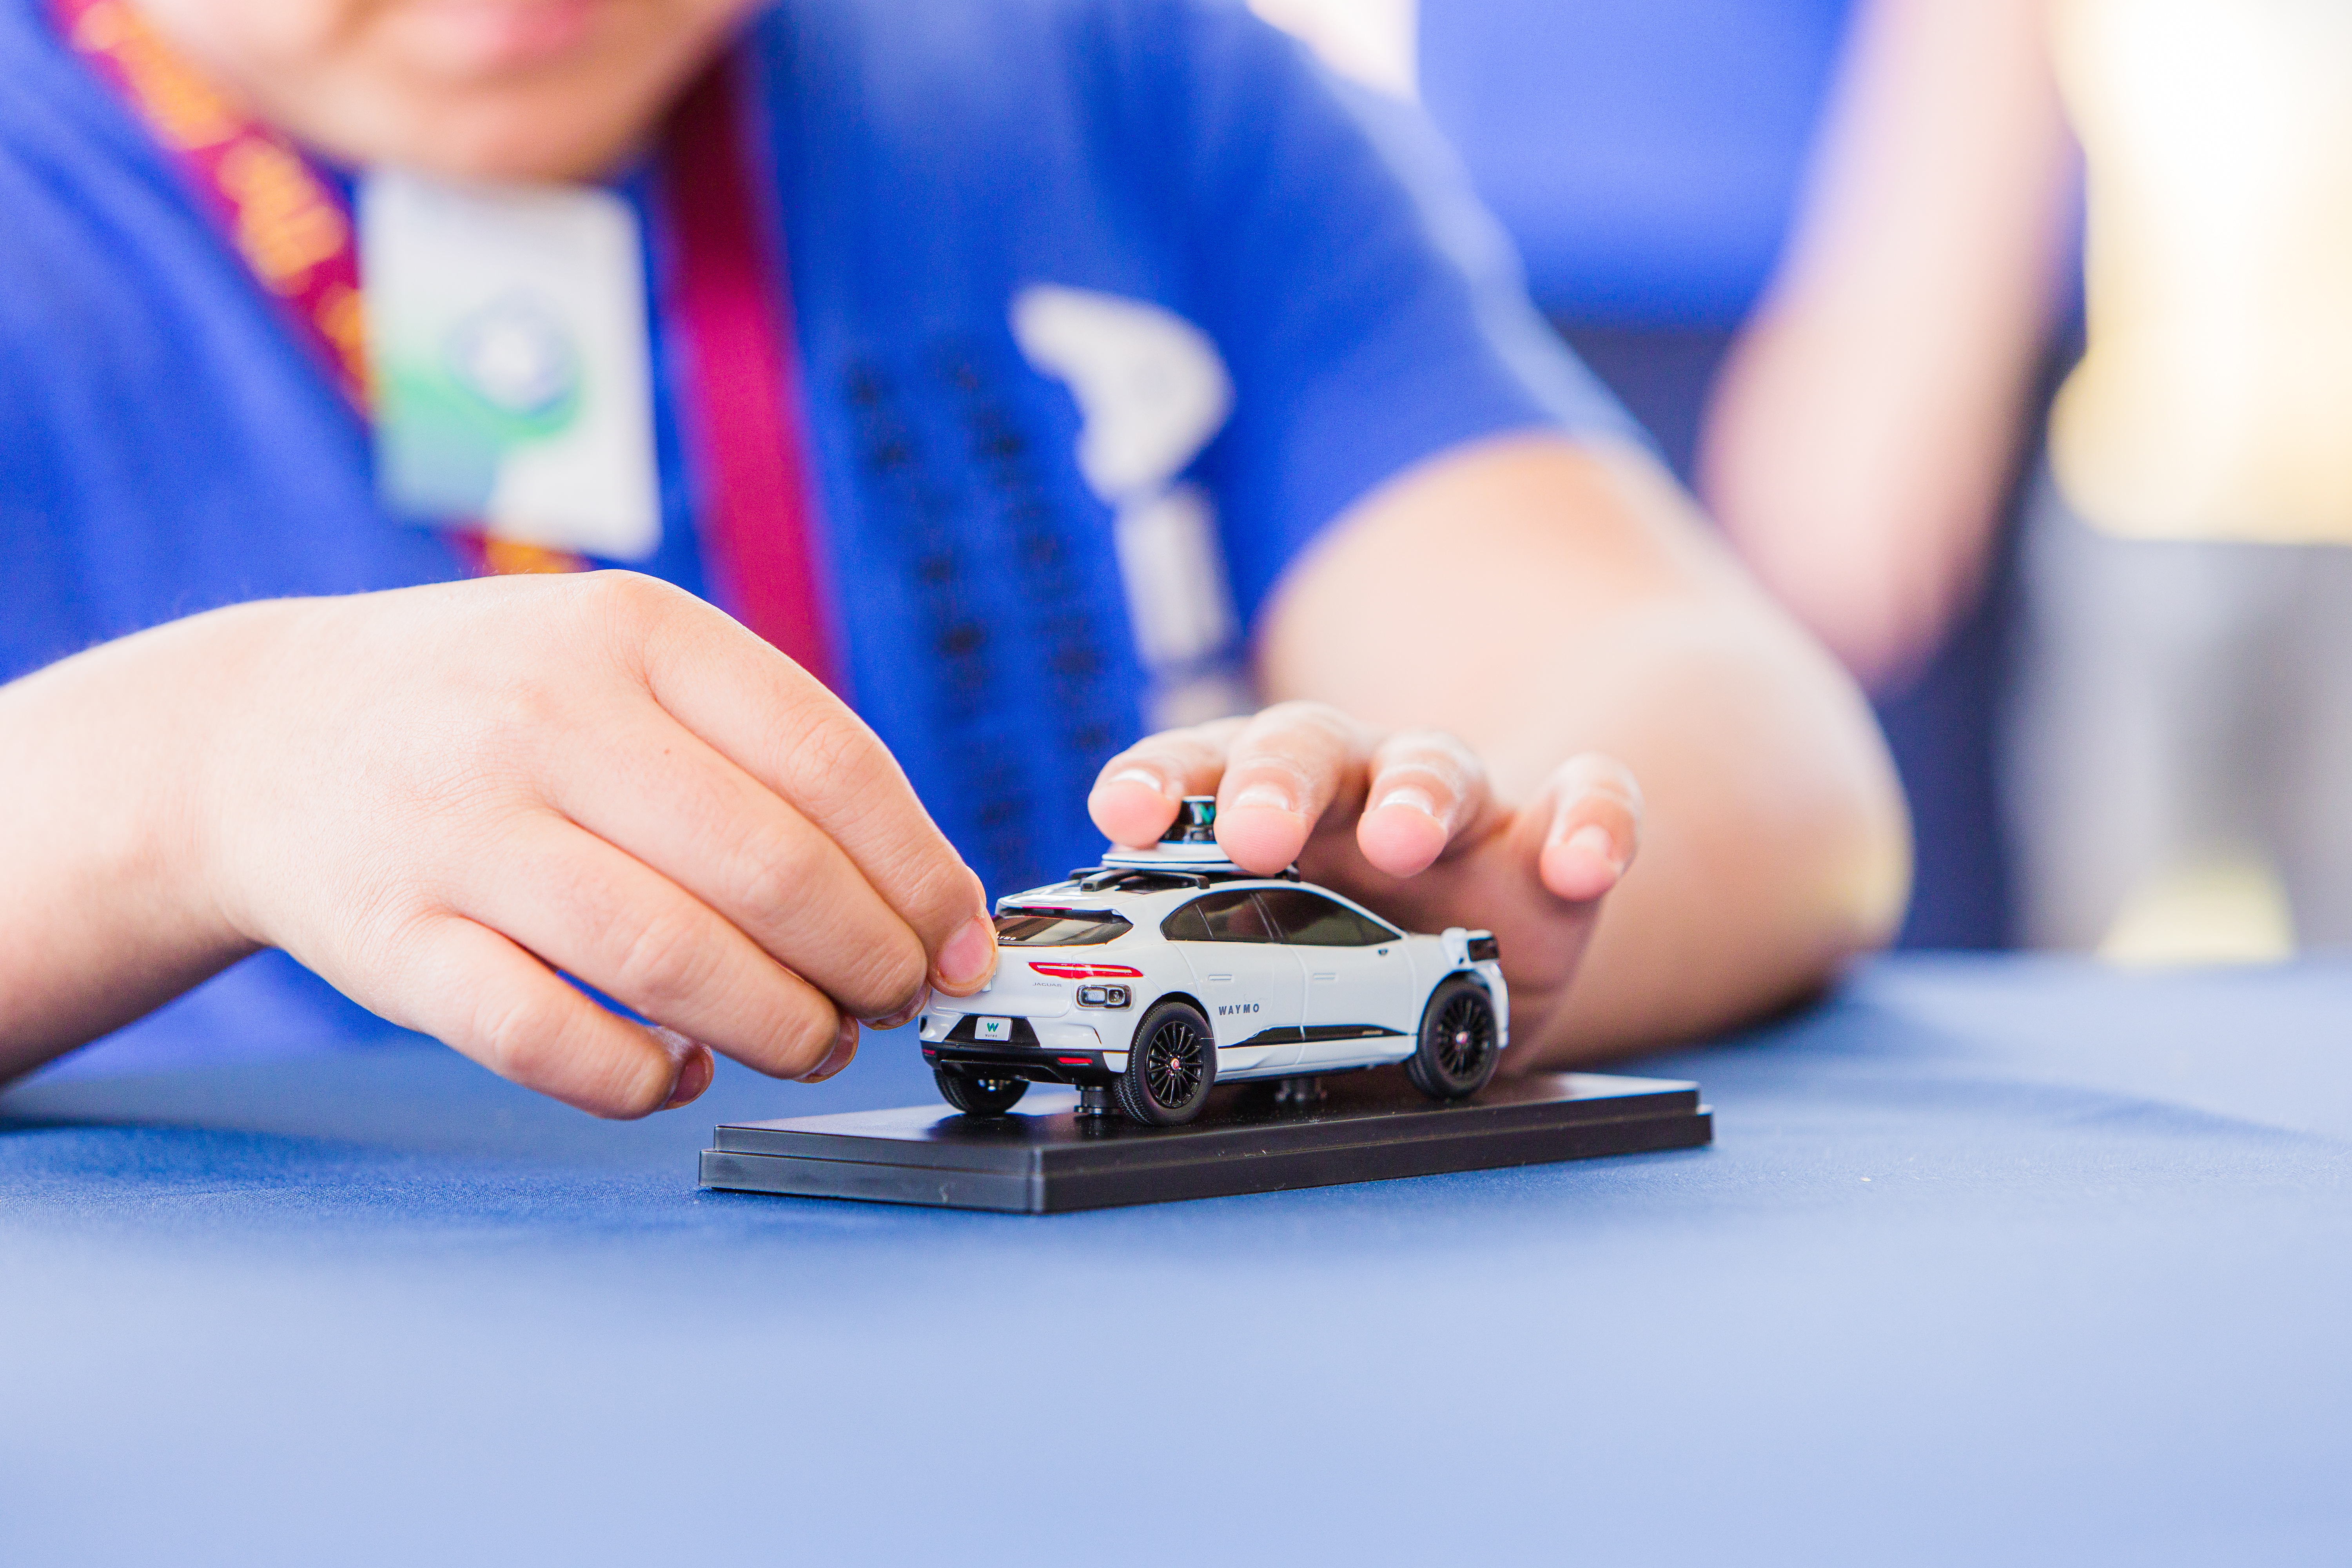 A student feels the outline of a small Waymo vehicle model on a table